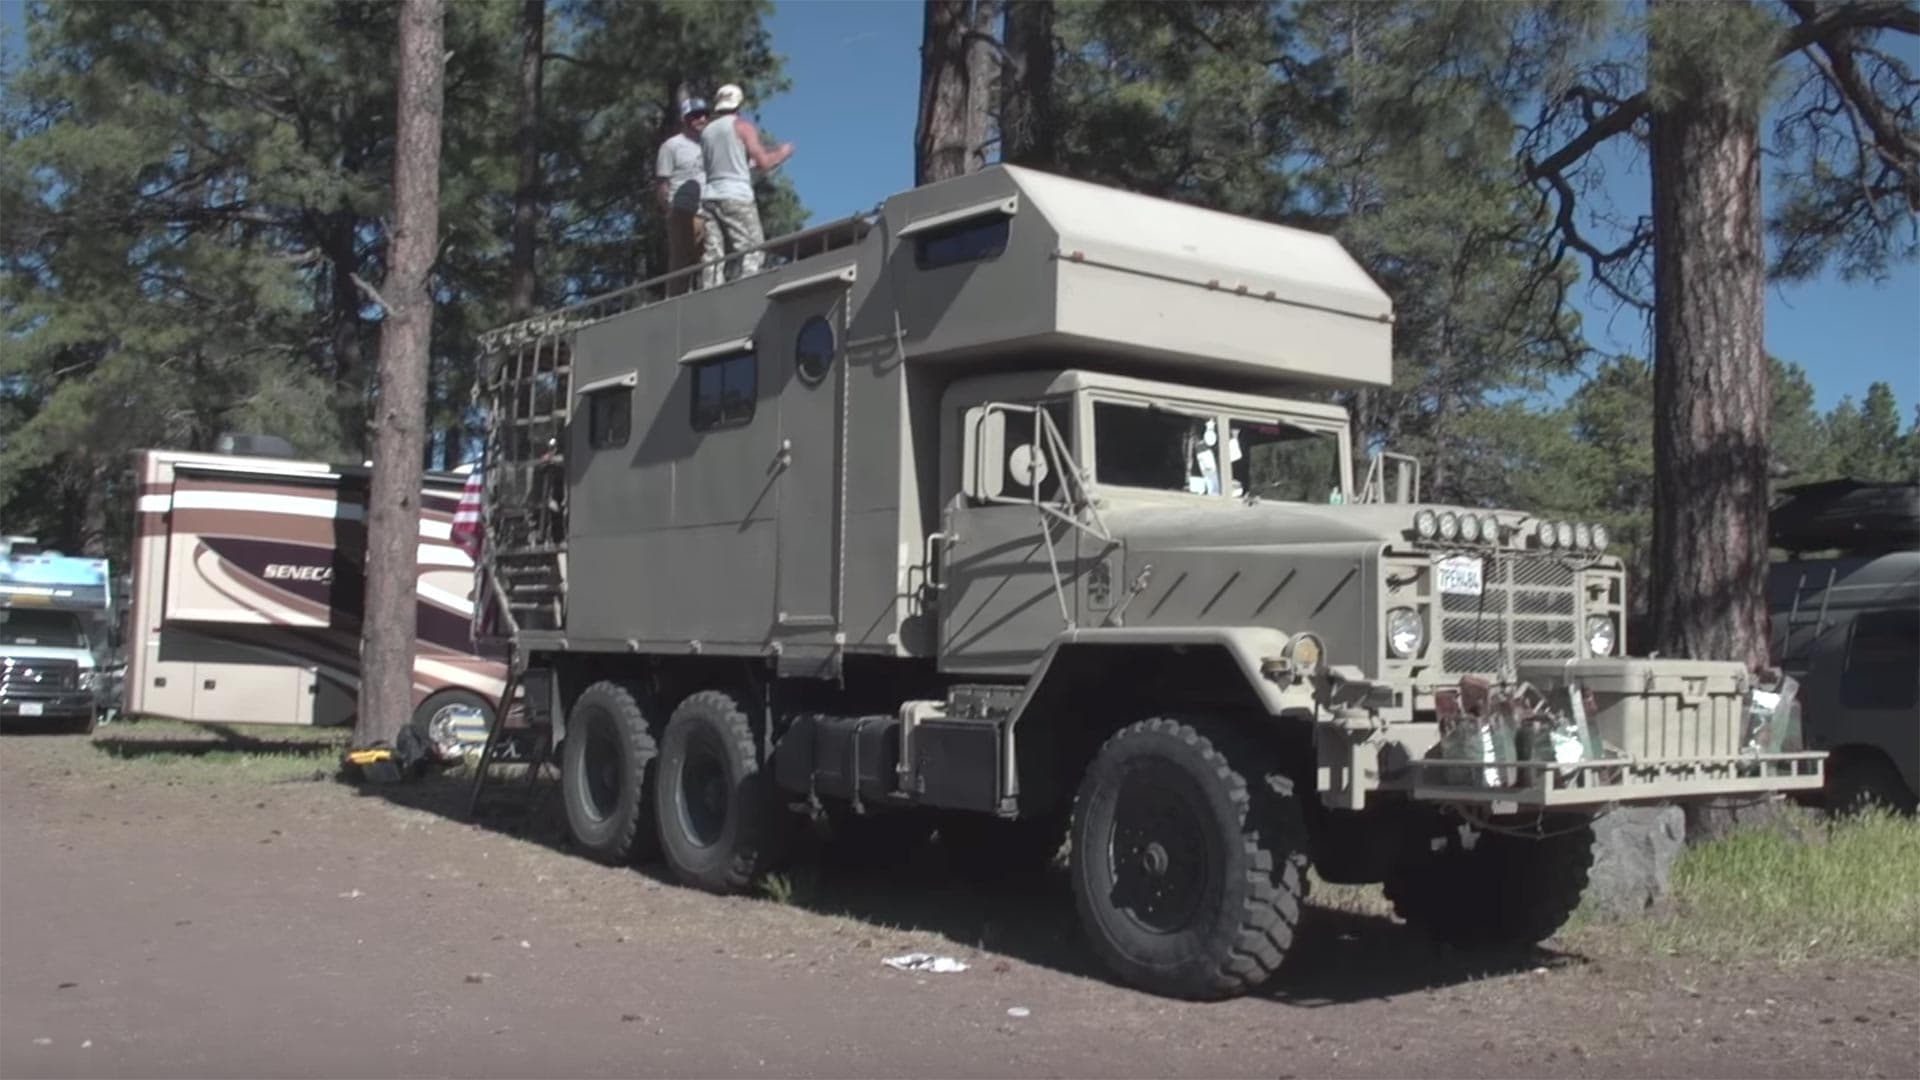 This Ex-Military Off-Road Recreational Vehicle Is a Craigslist Custom Done Right